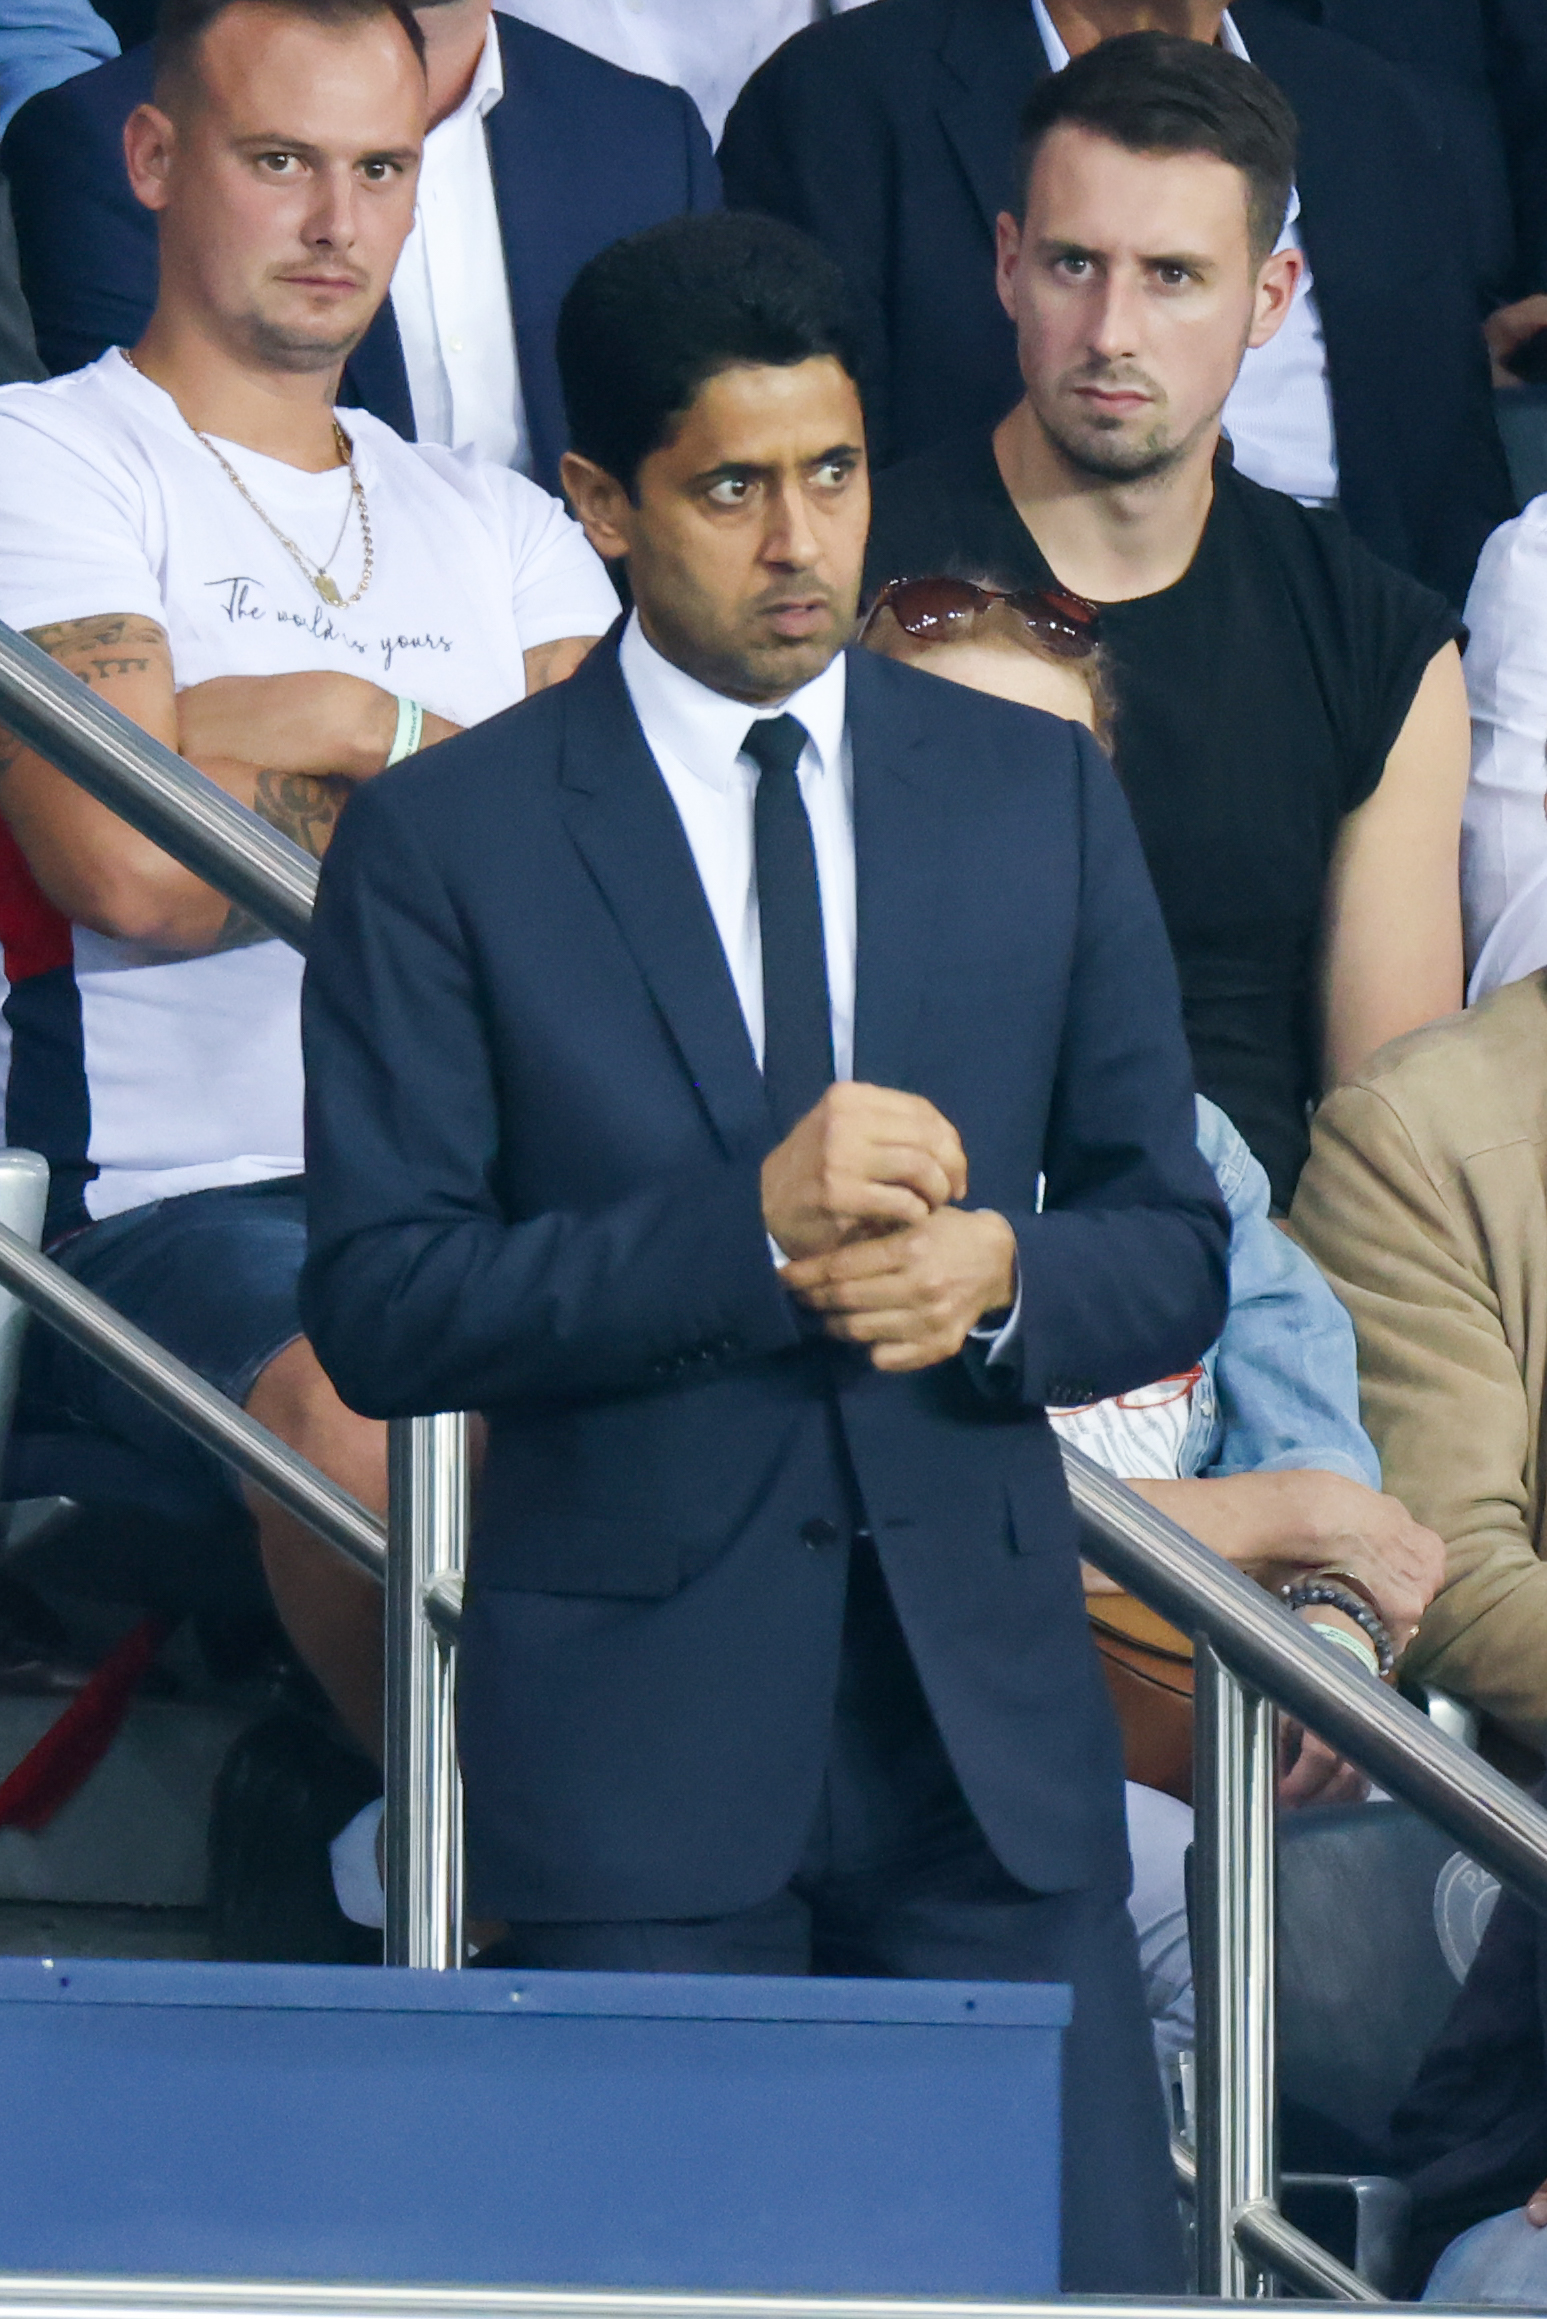 PSG President warns Barcelona about the dange  order manchester united jersey online  rs of massive cash injections